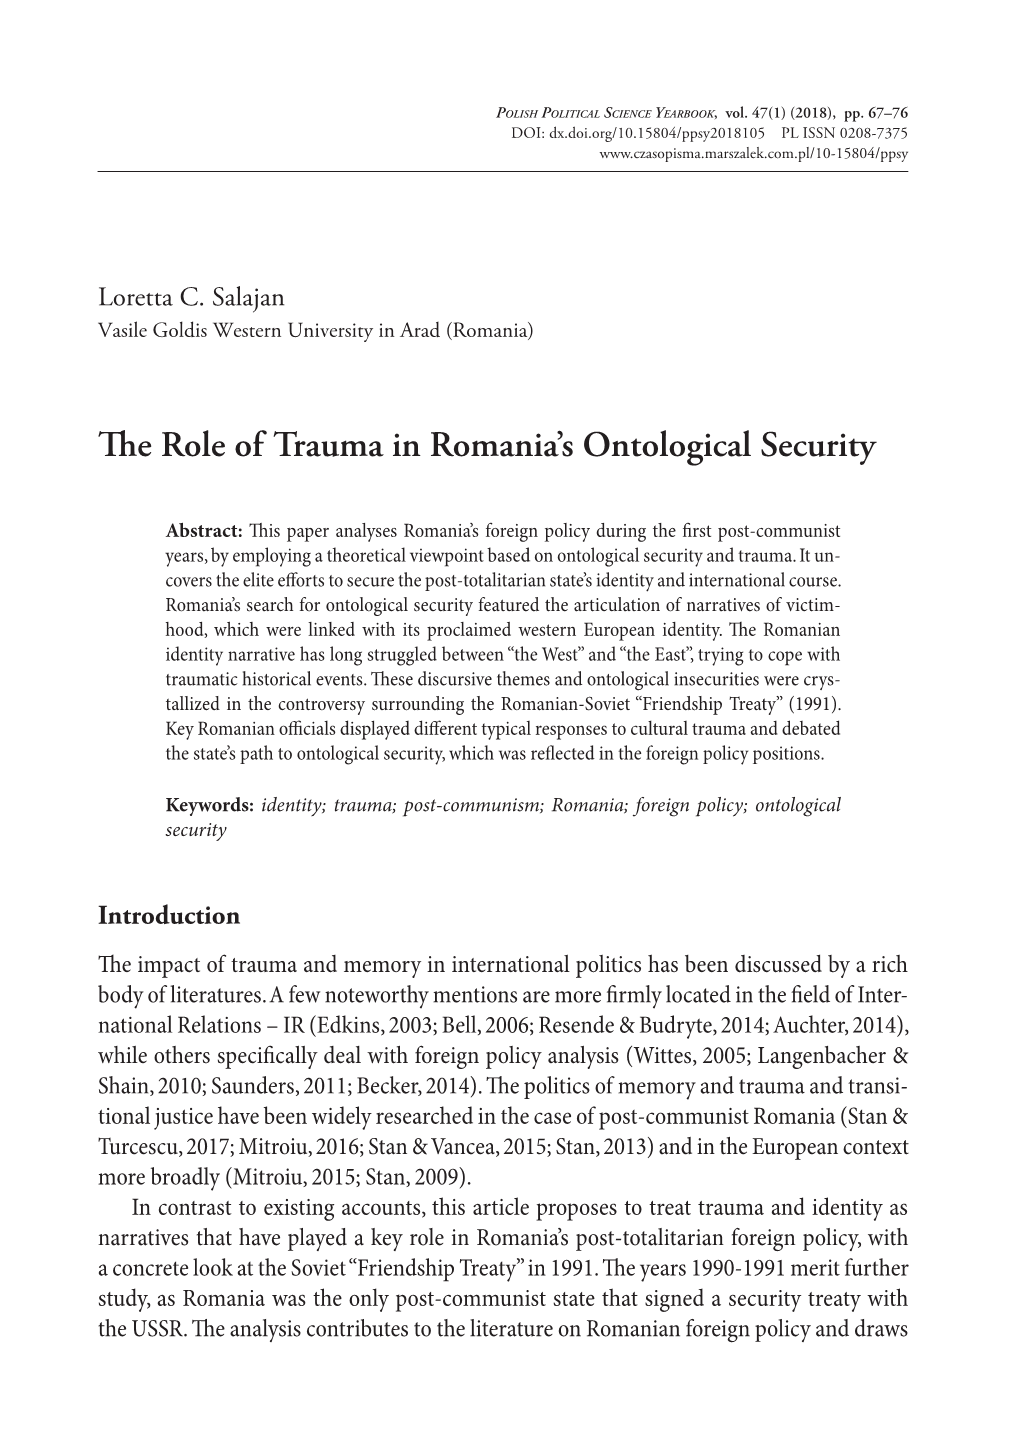 The Role of Trauma in Romania's Ontological Security